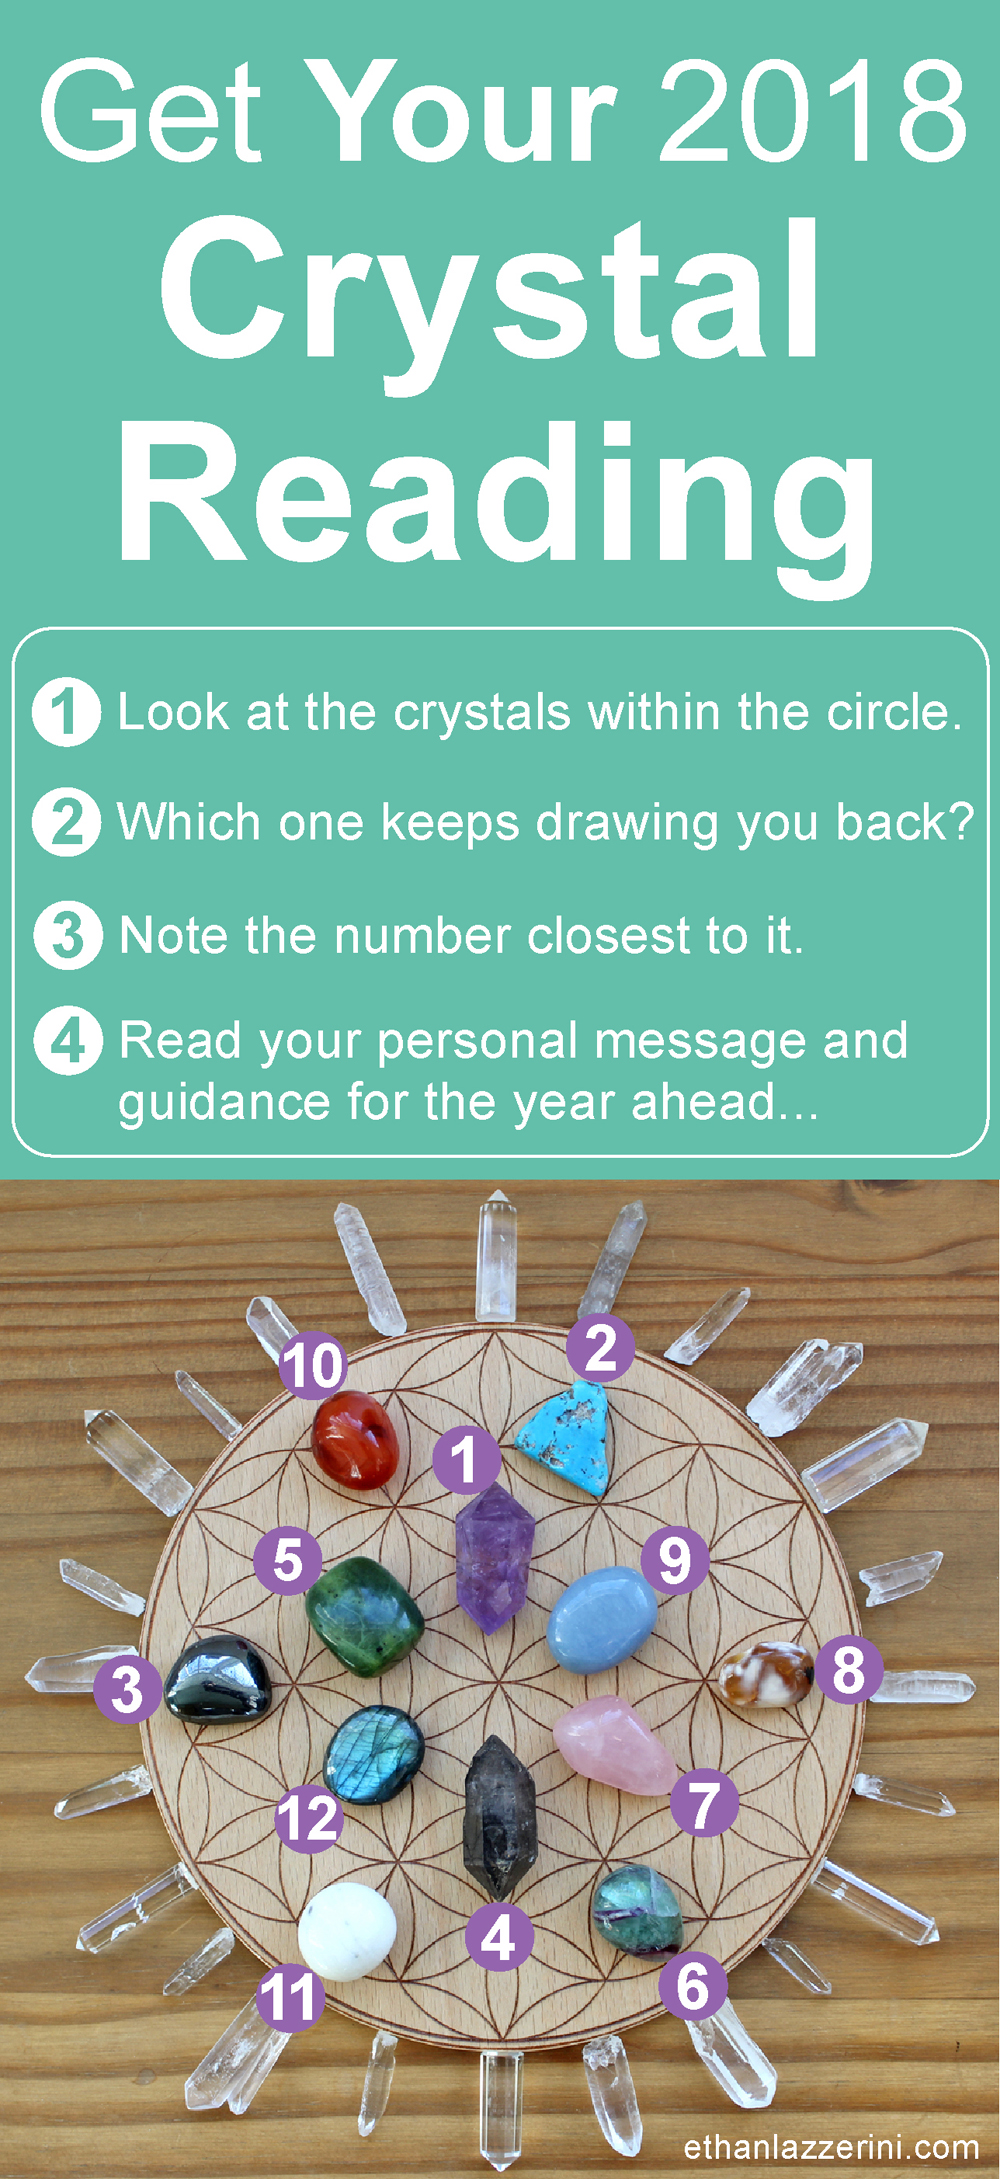 Crystal Reading for the year ahead